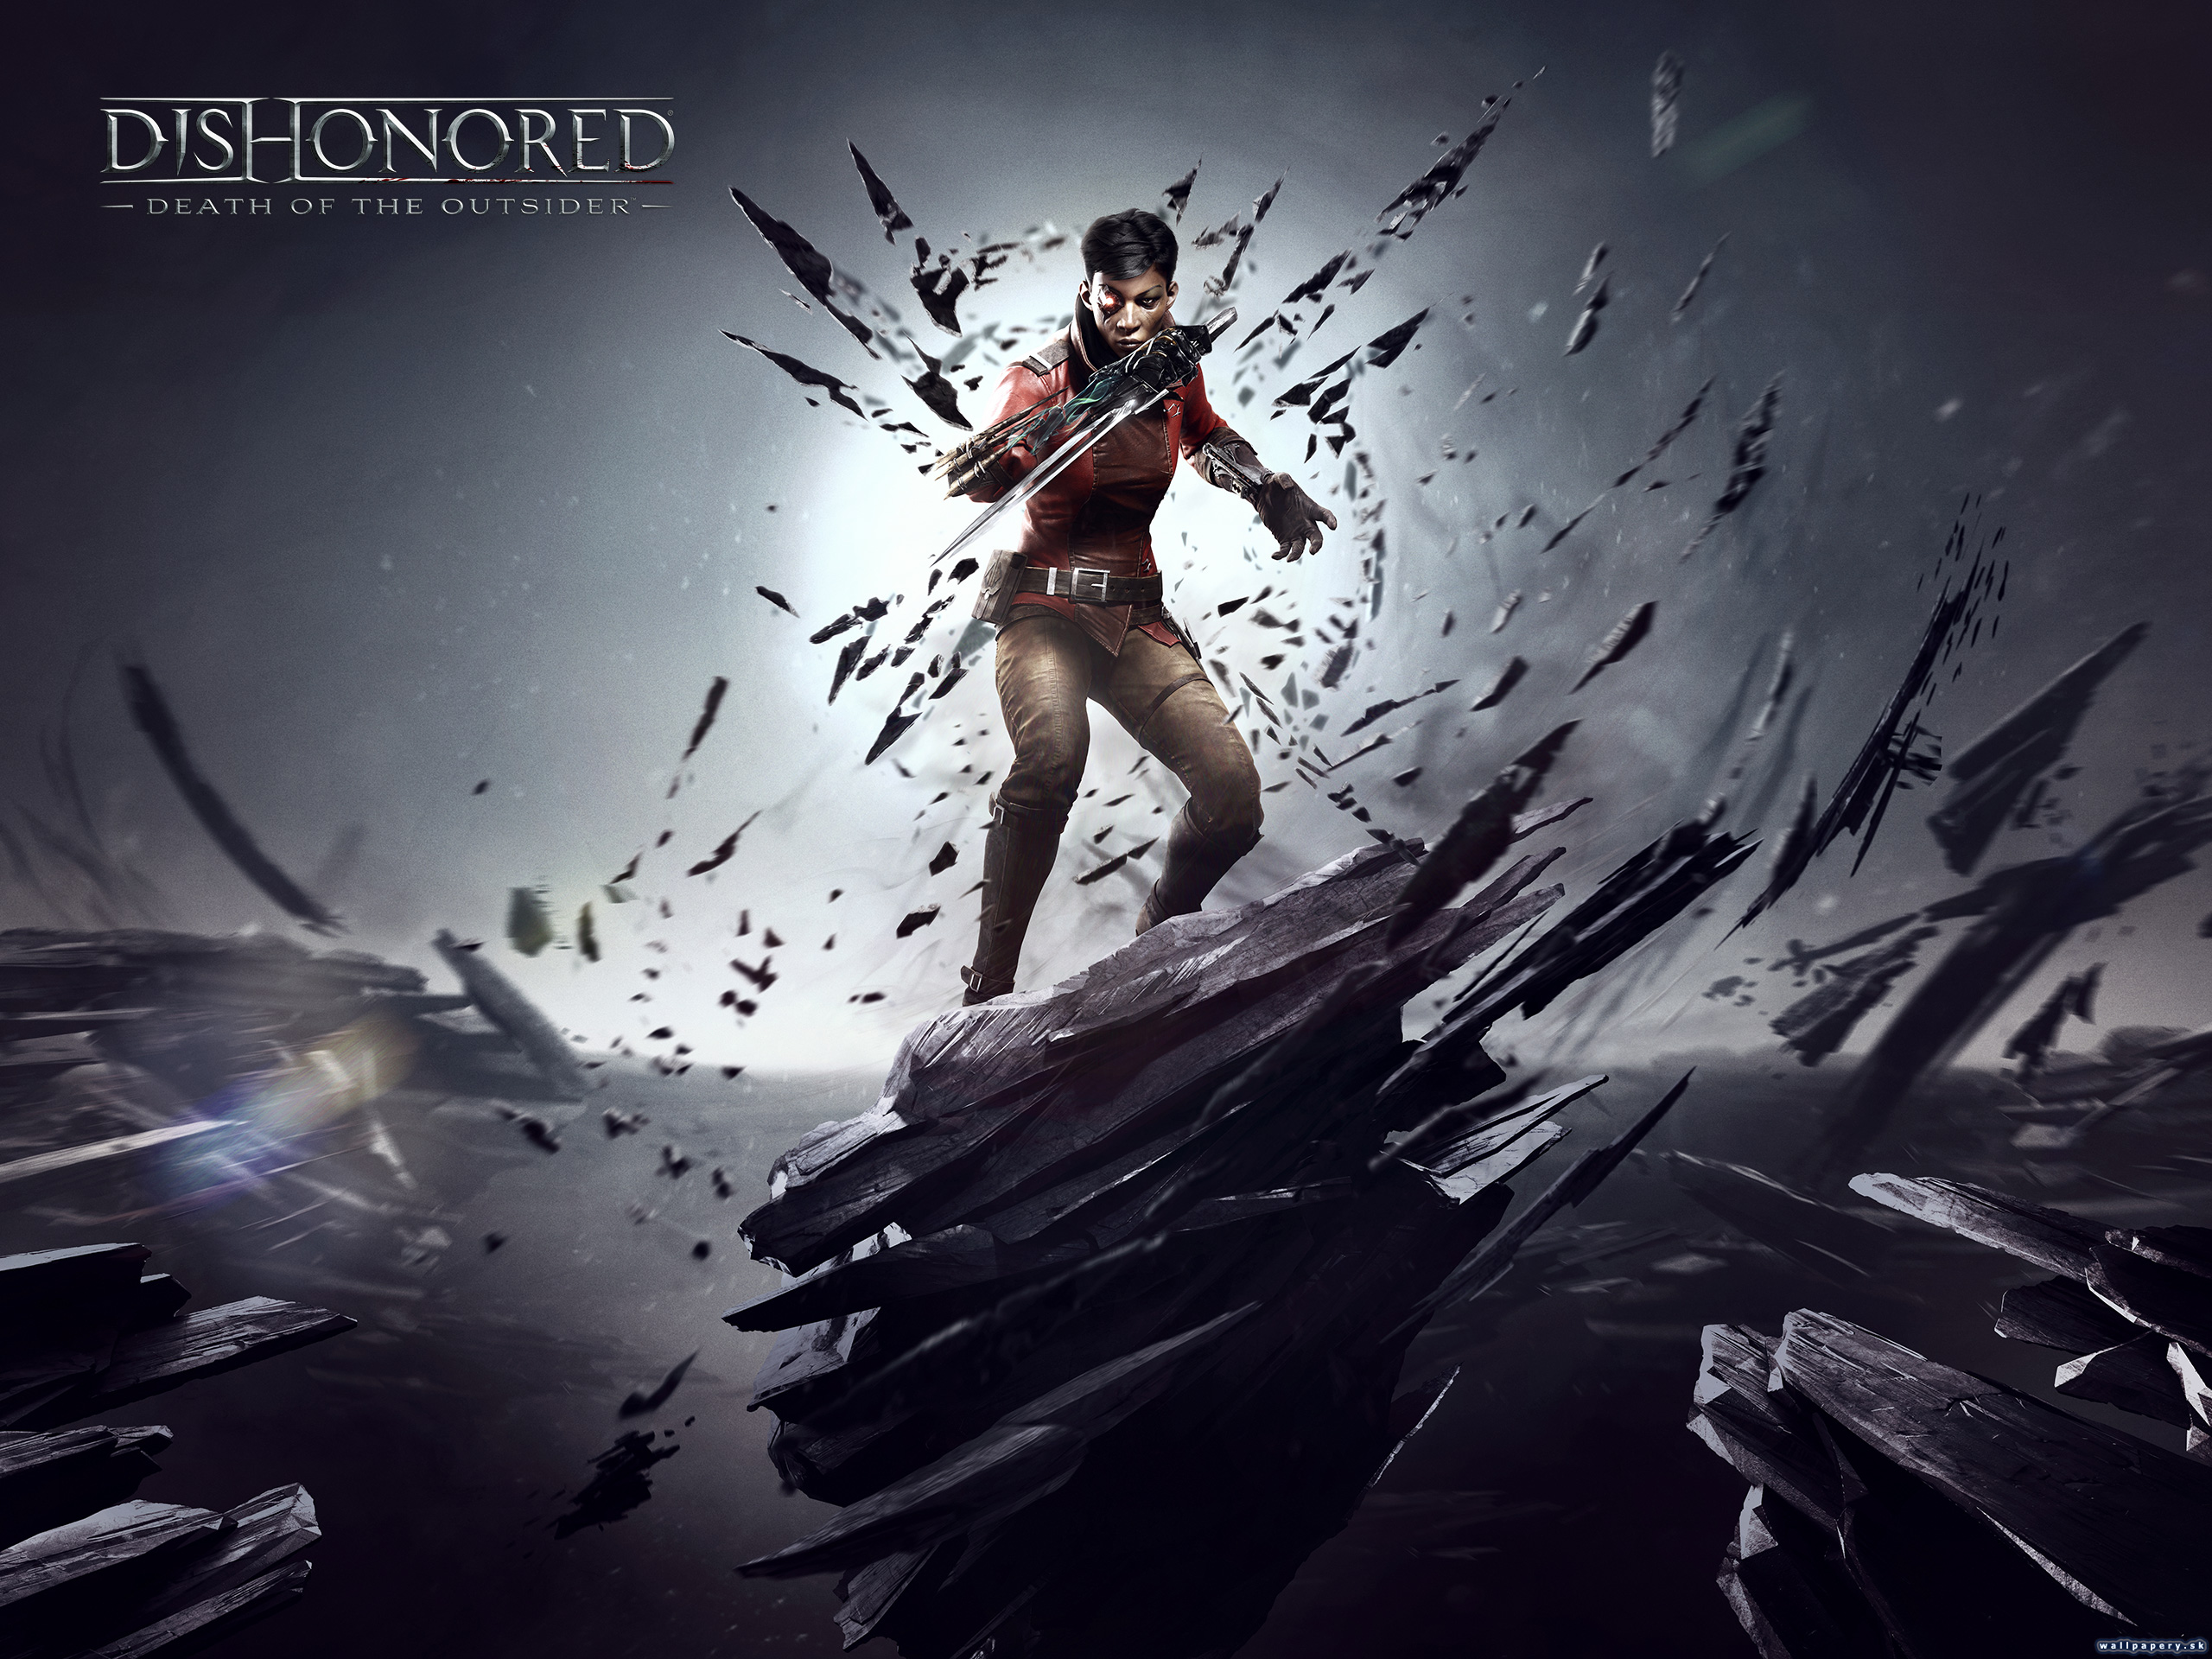 Dishonored: Death of the Outsider - wallpaper 1